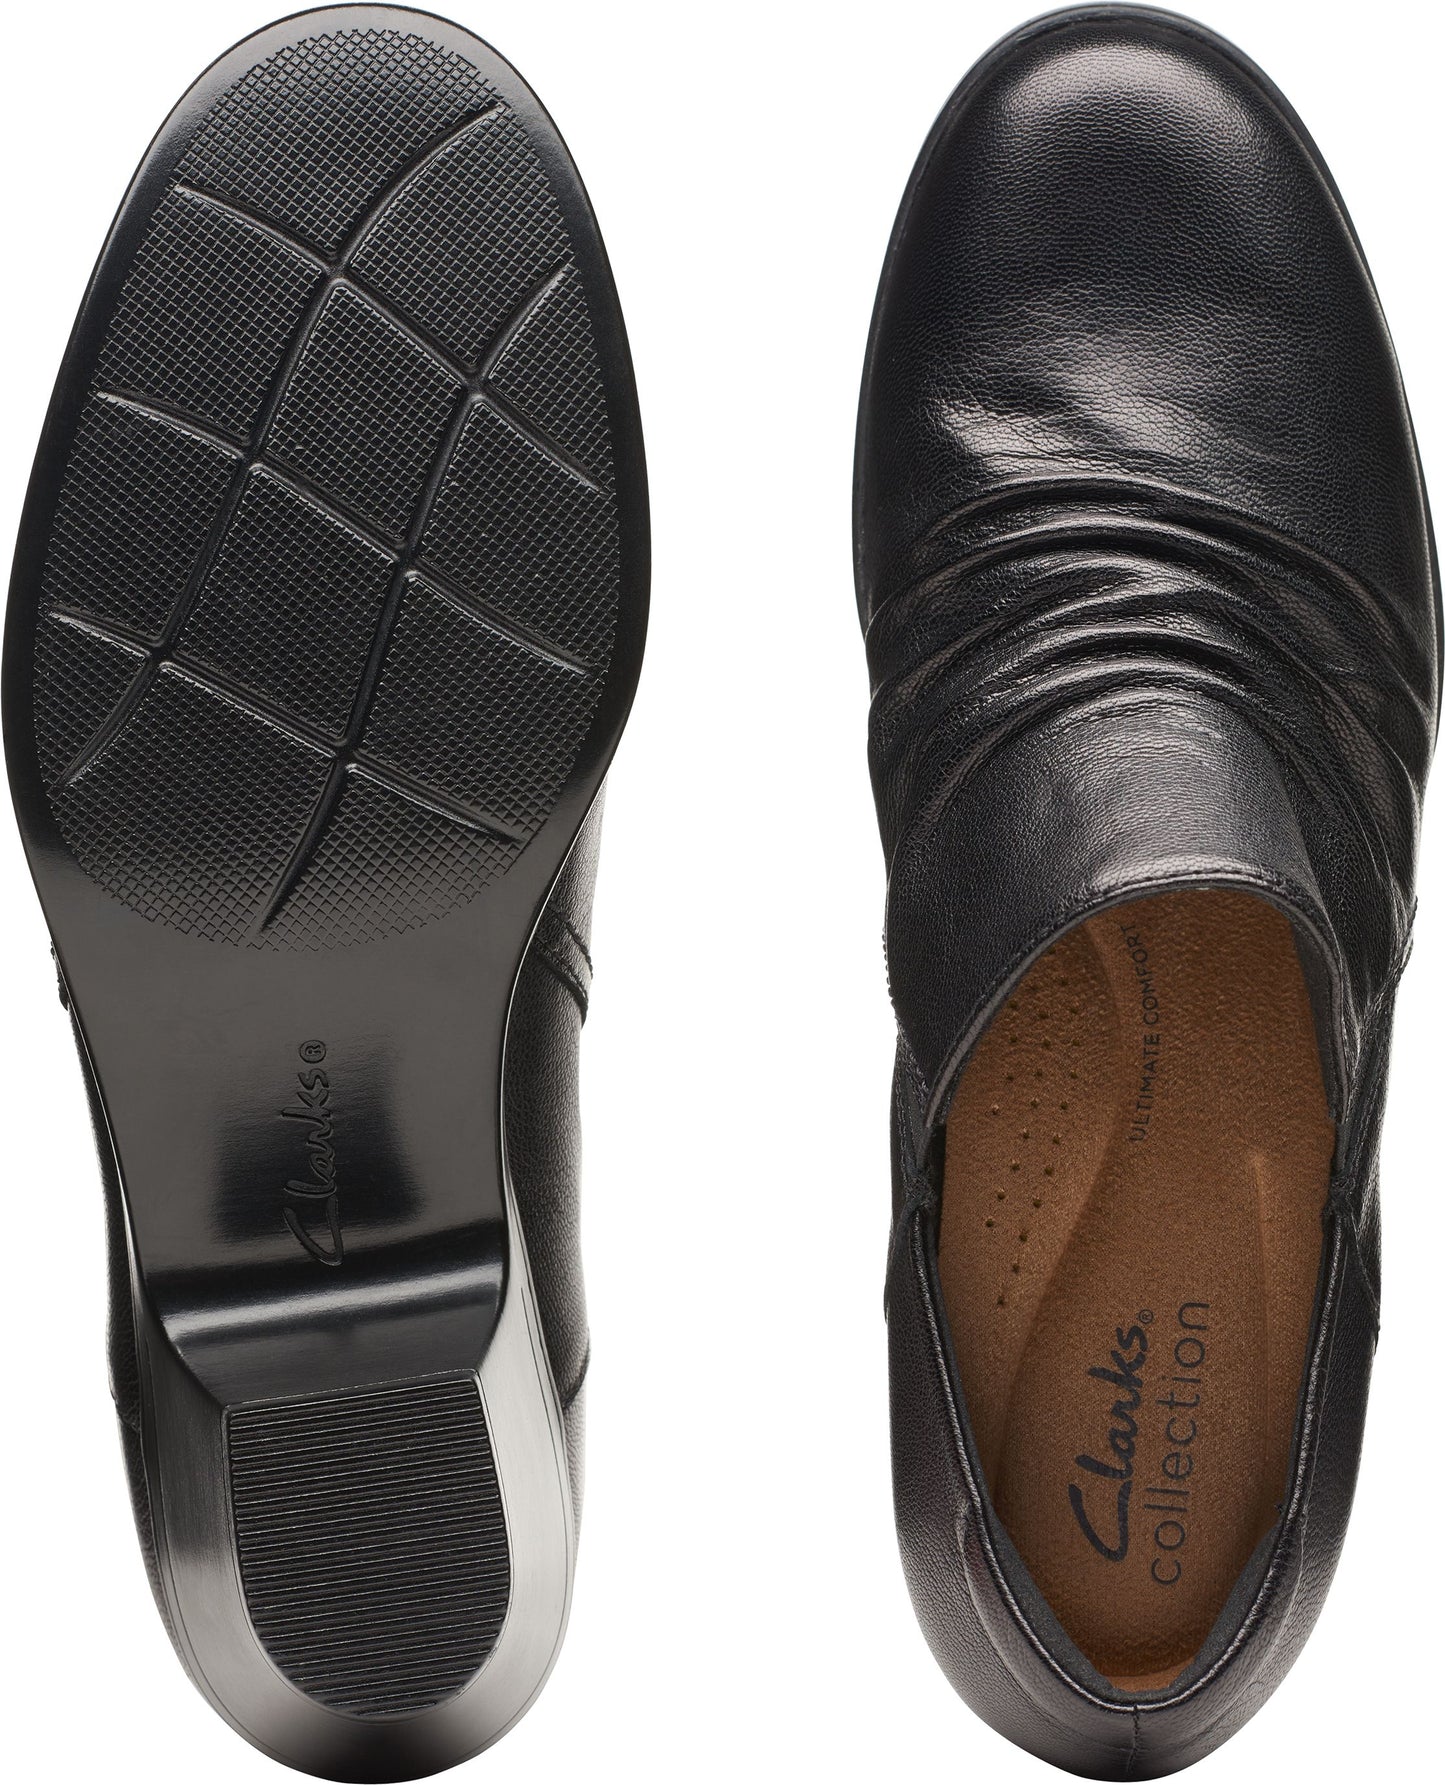 Clarks Shoes Emily 2 Cove Black Leather